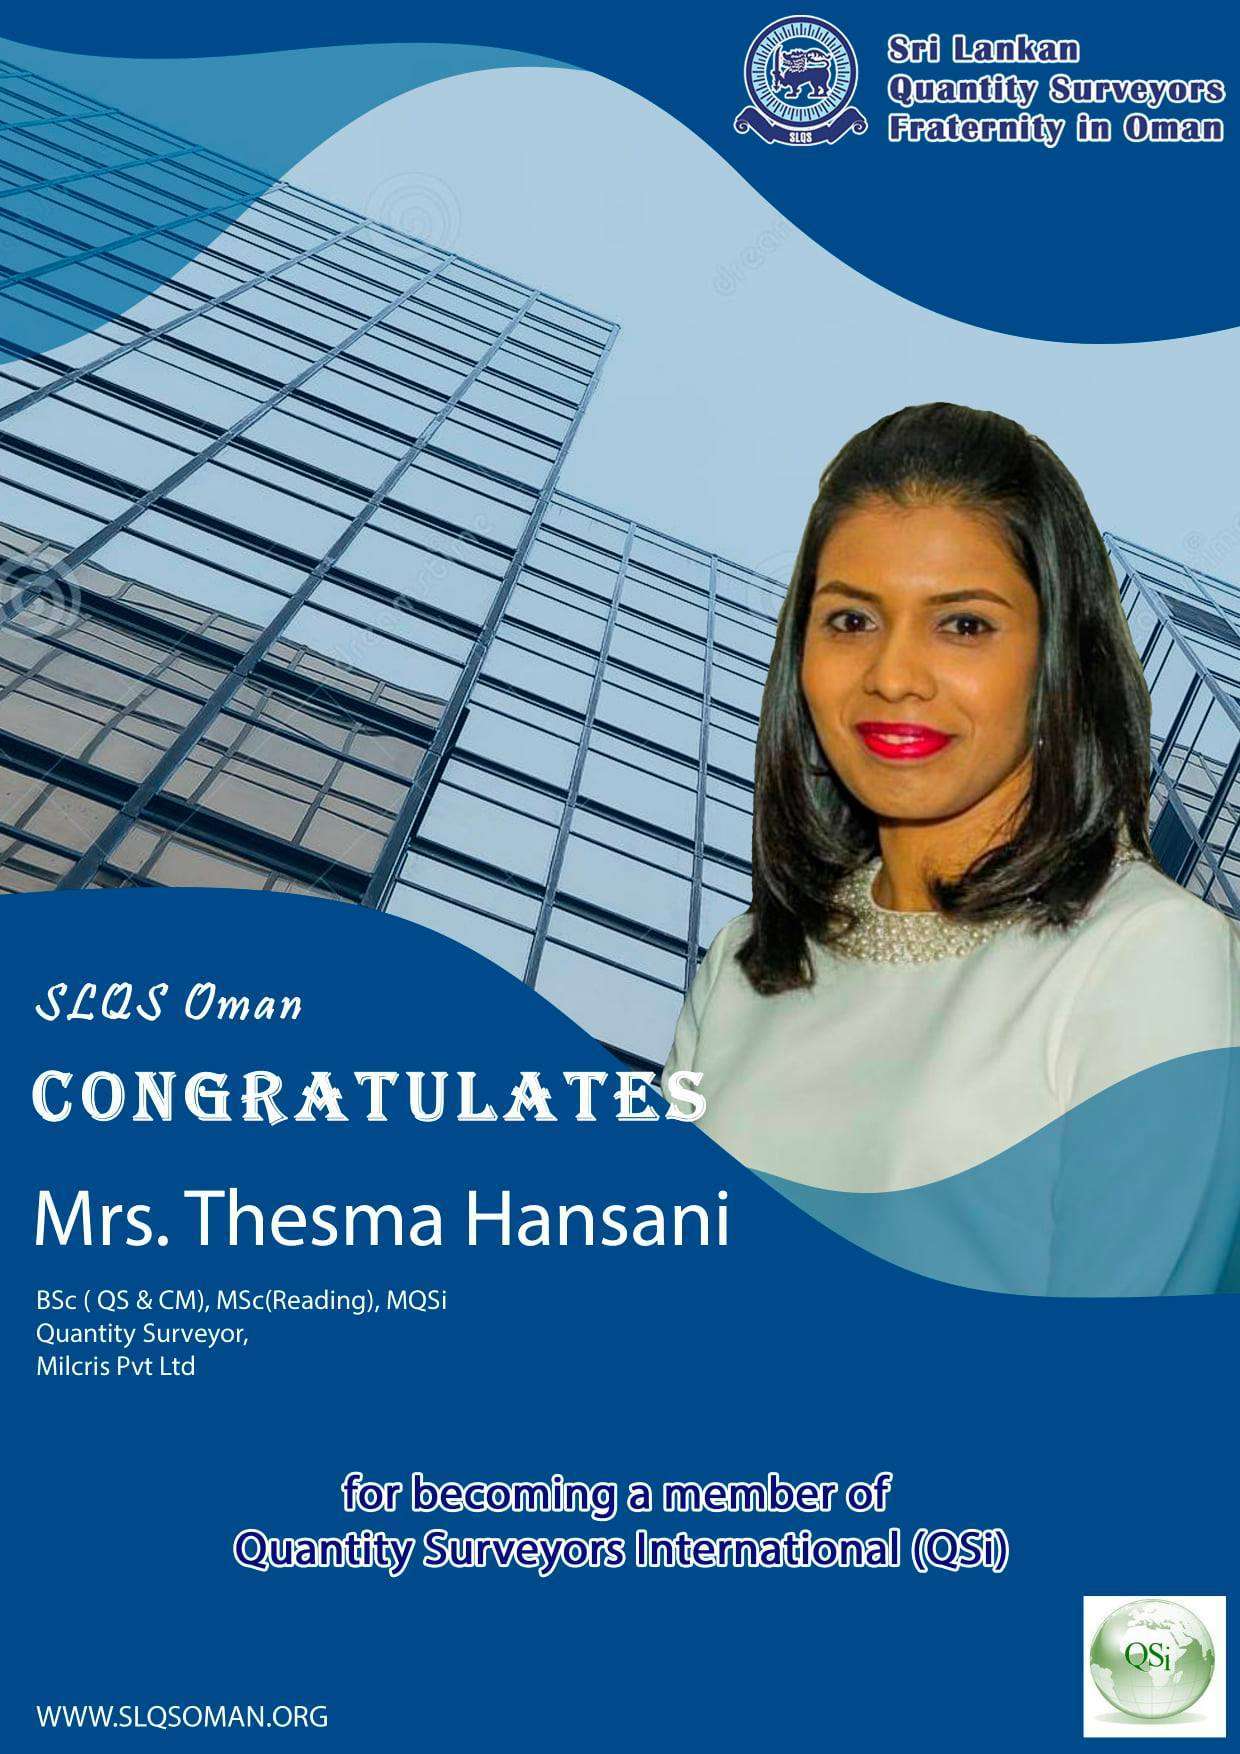 Congratulations!! Mrs Thesma Hansini !! For becoming a member of QSi